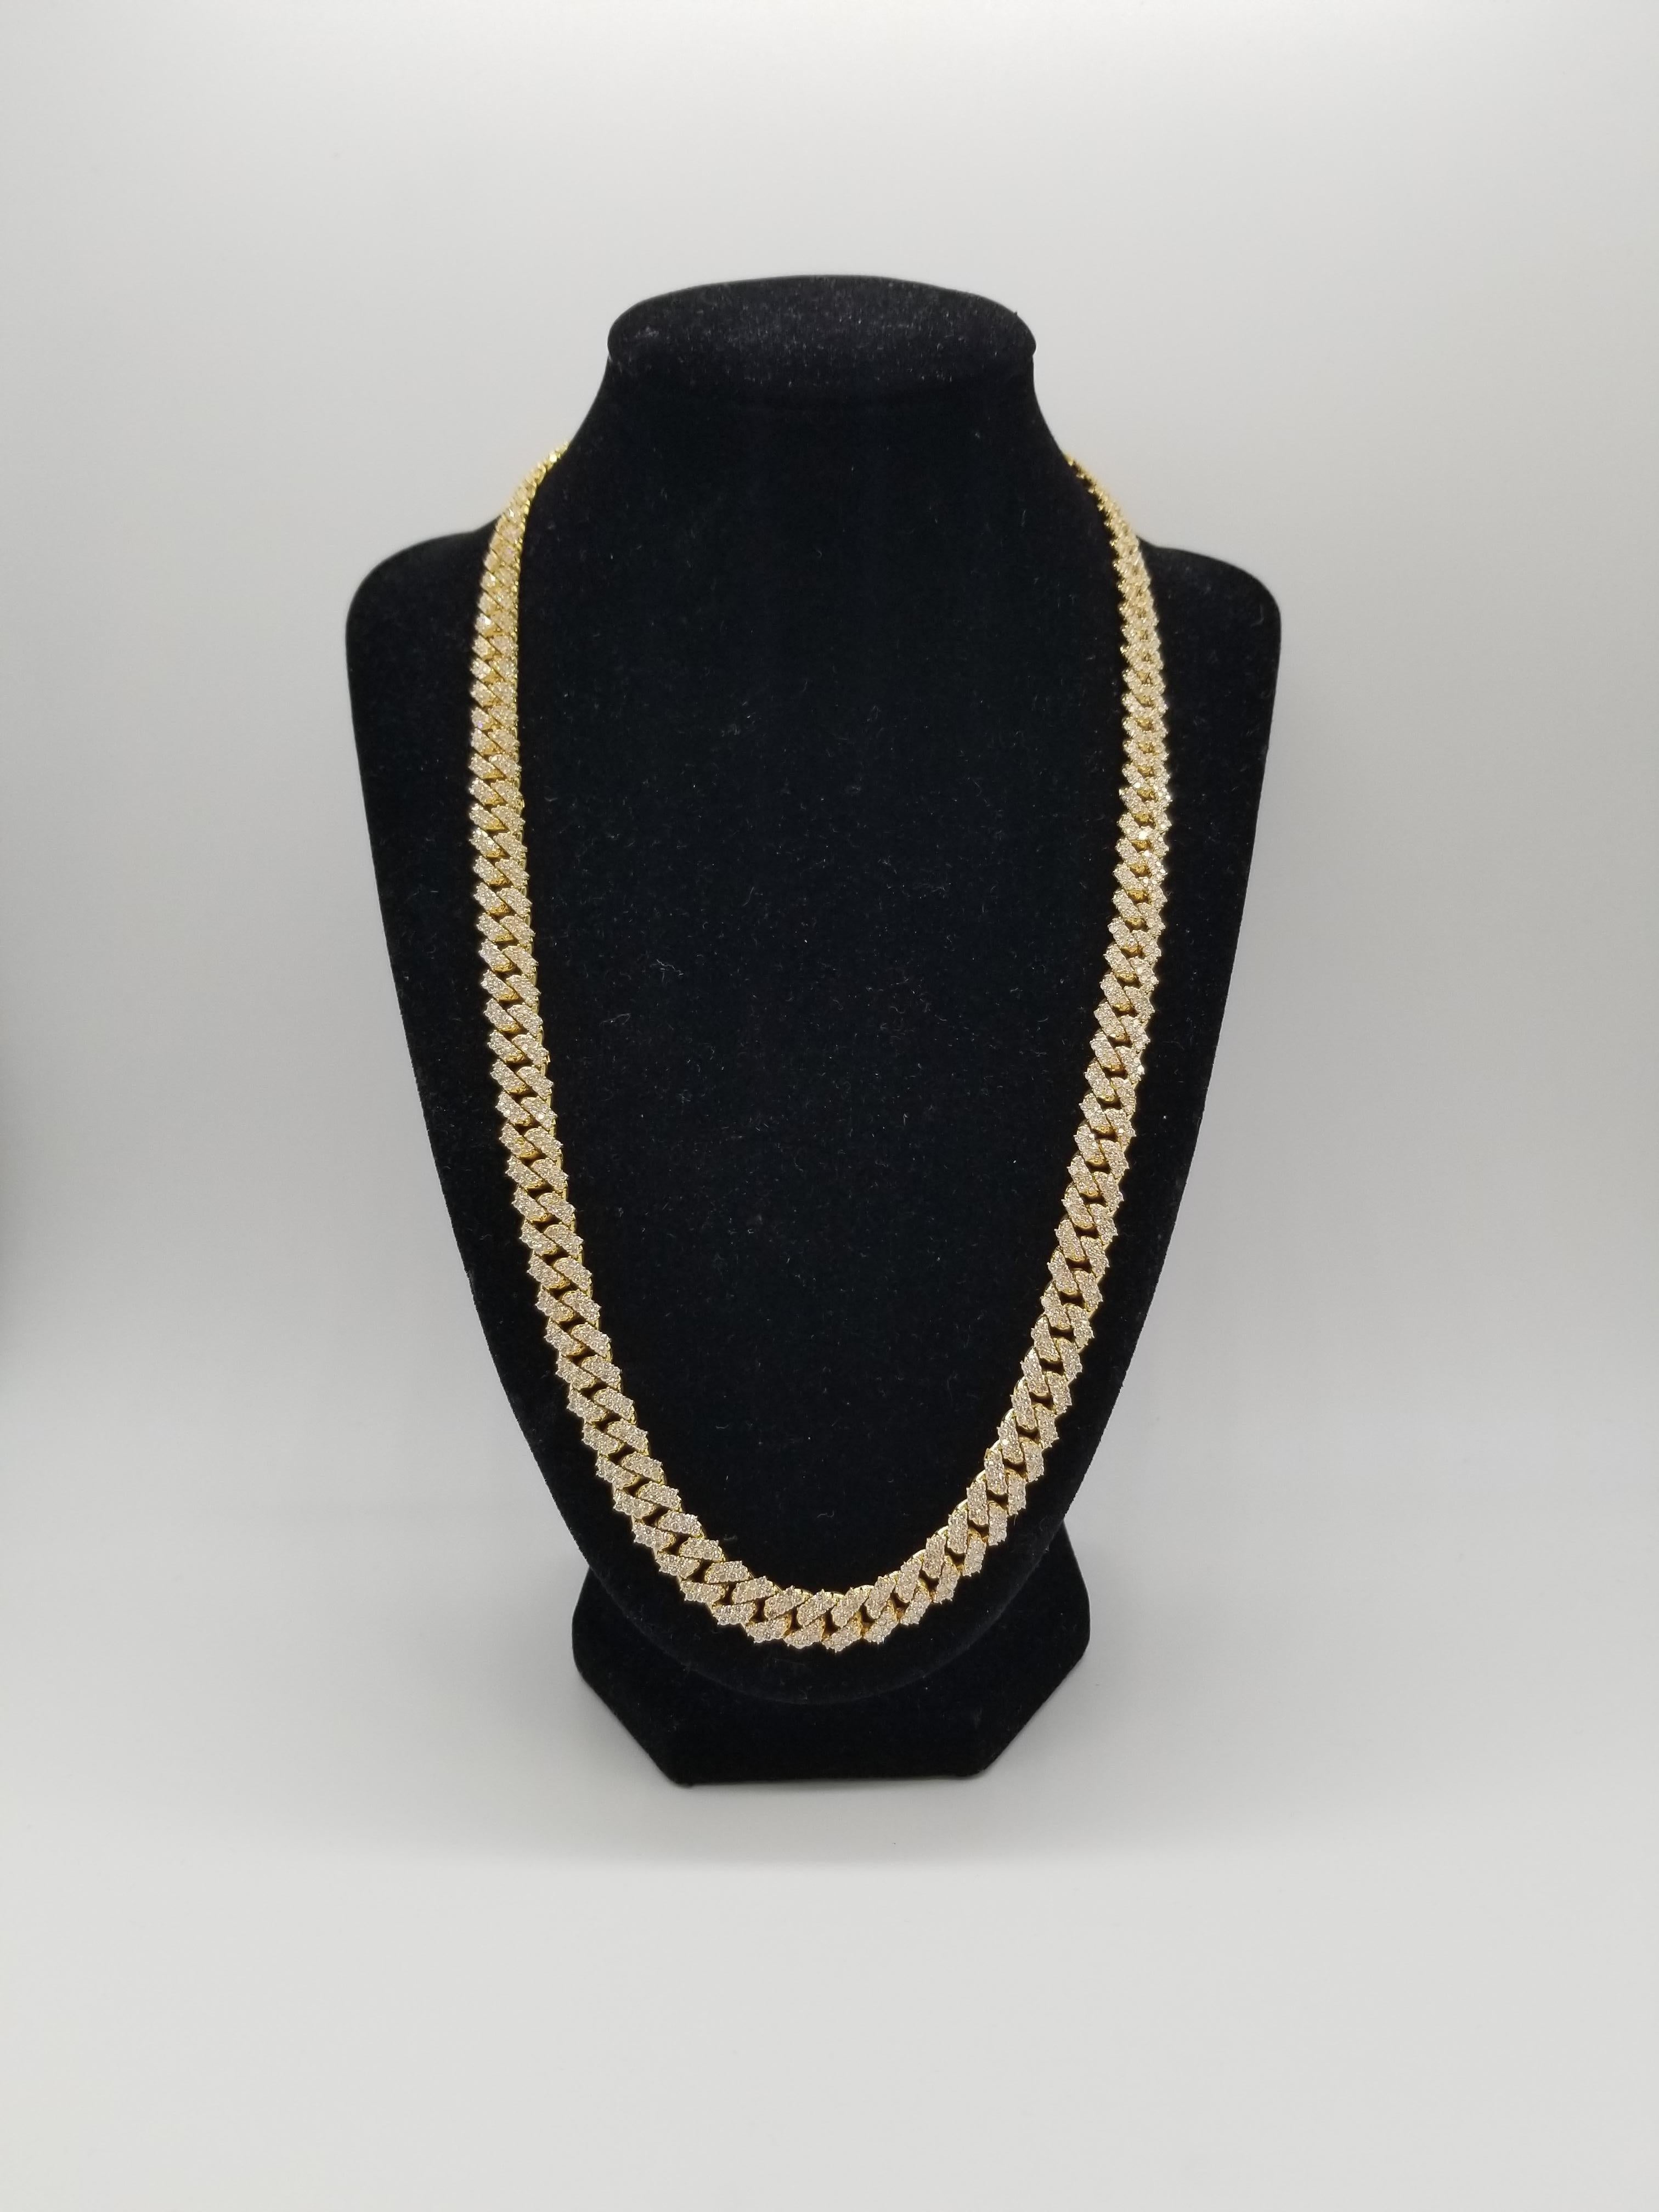 GORGEOUS 17.50 Carats Total Weight Heavy Gold Cuban Necklace Chain 14 Karats Yellow Gold 
22 inch long, 8.8 mm wide, Average Color I, Clarity SI, Very Shiny.
83 GRAM SOLID GOLD , 1,600+ PCS ALL NATURAL DIAMONDS.